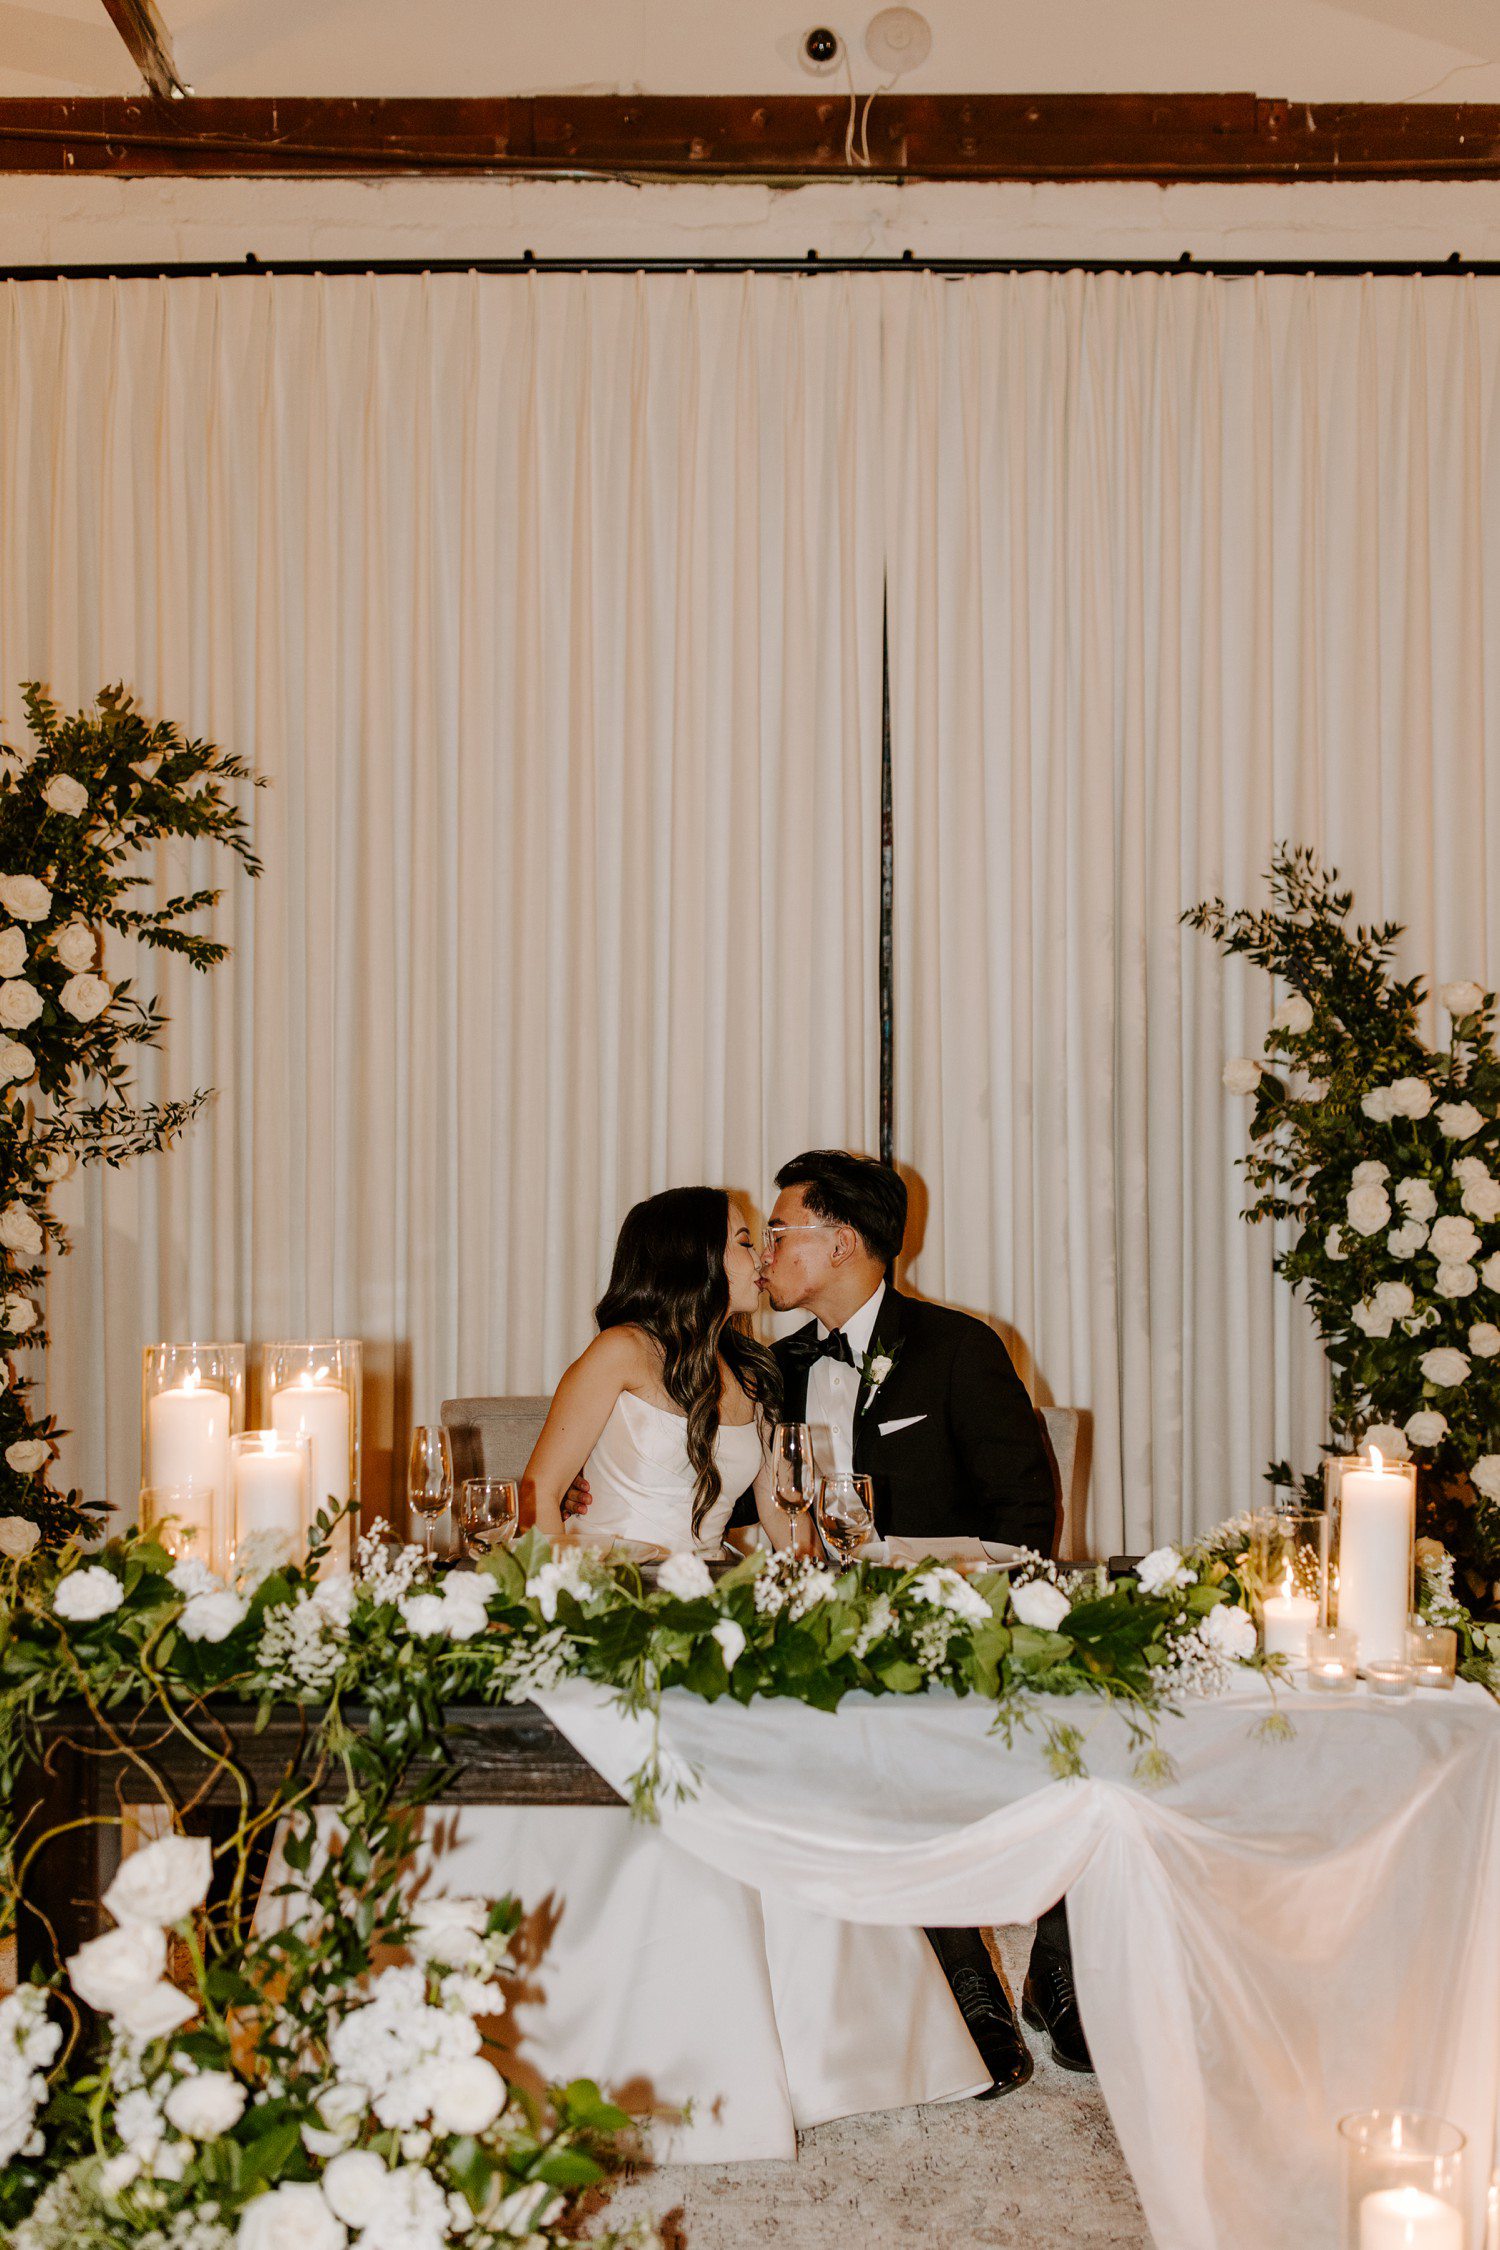 Bride and groom kiss at reception table.